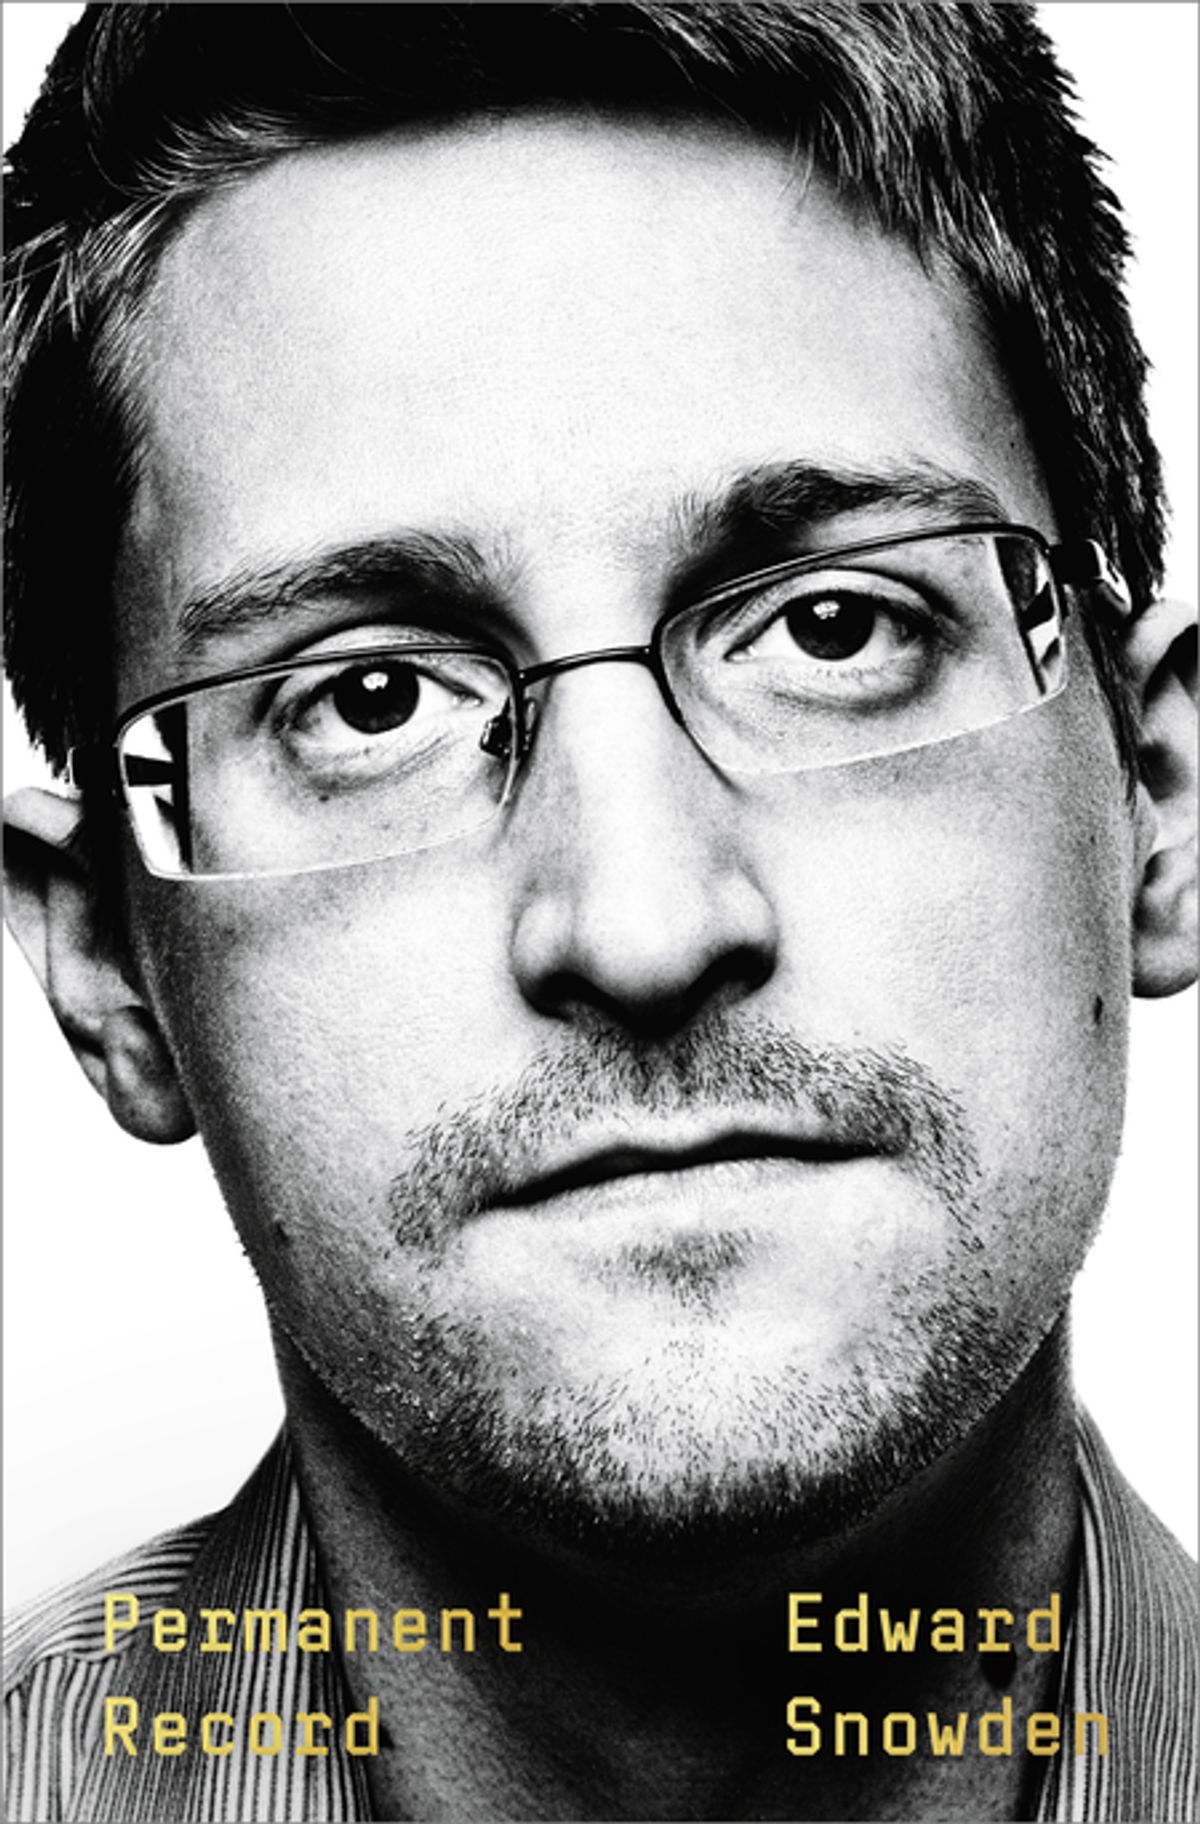 Friday Reads: Permanent Record by Edward Snowden